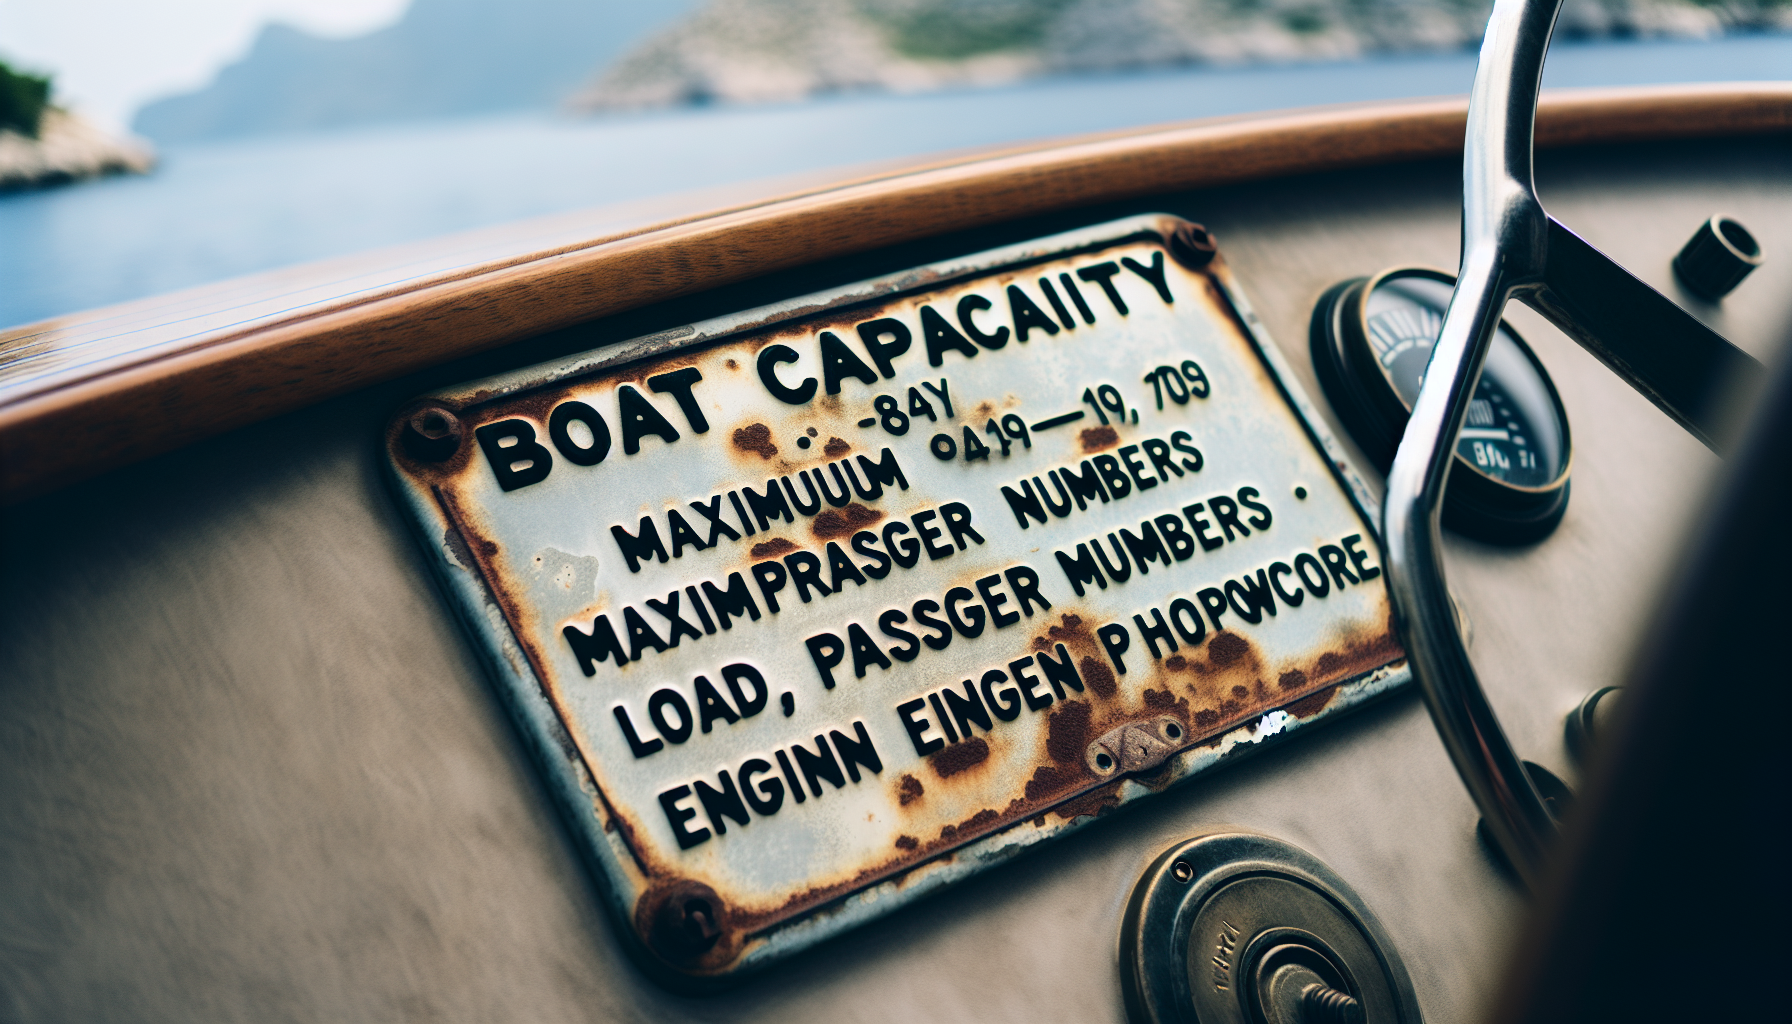 Boat's capacity plate with important details